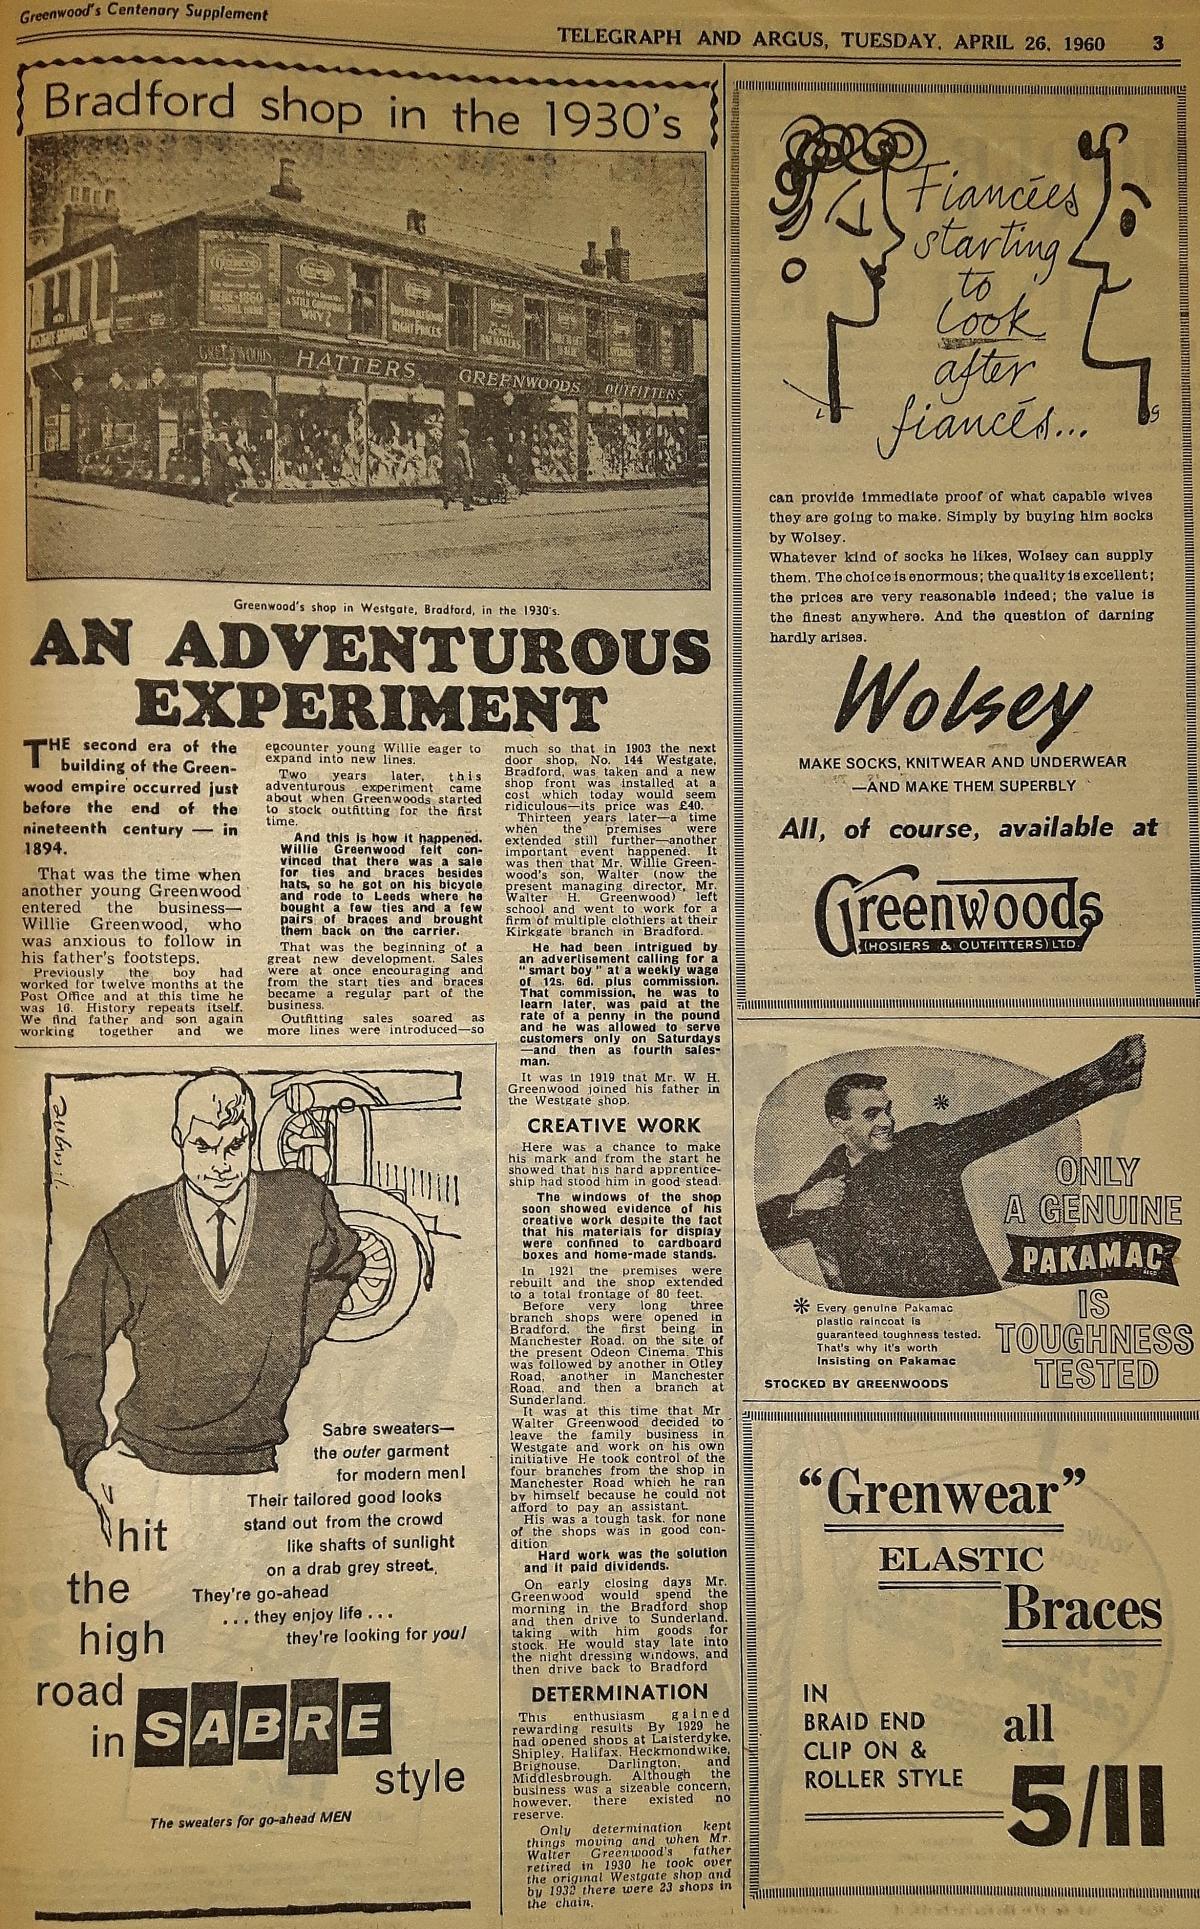 Greenwoods Centenary supplement 26 April 1960 page 3